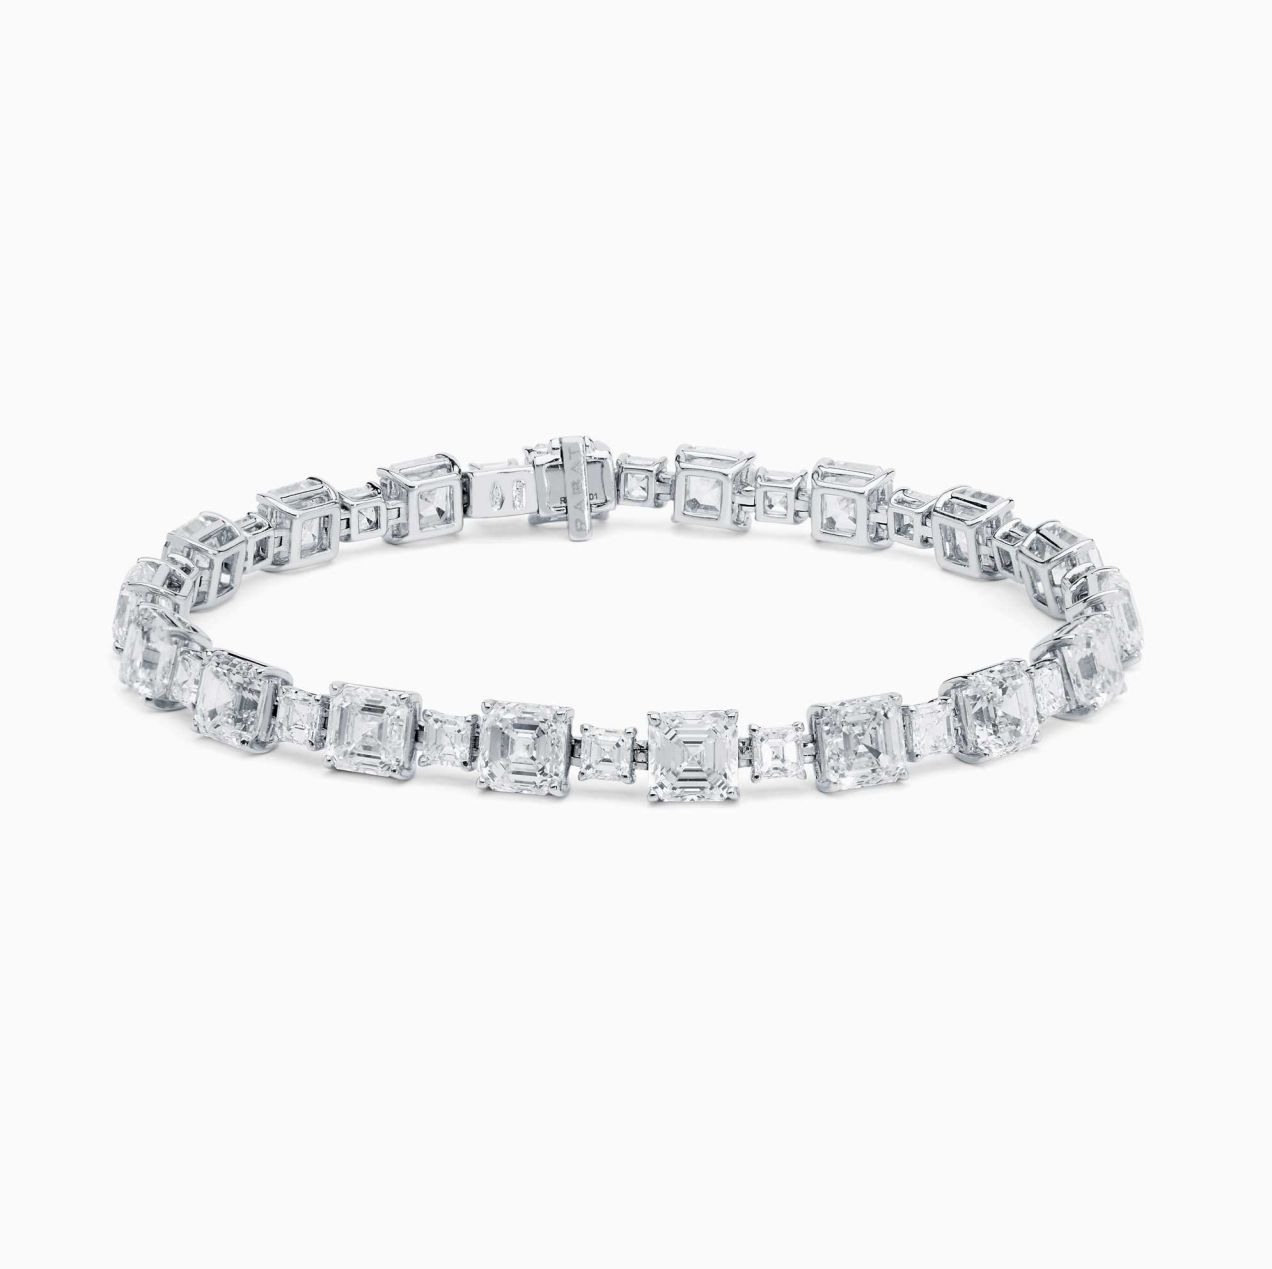 White gold riviere bracelet with diamonds